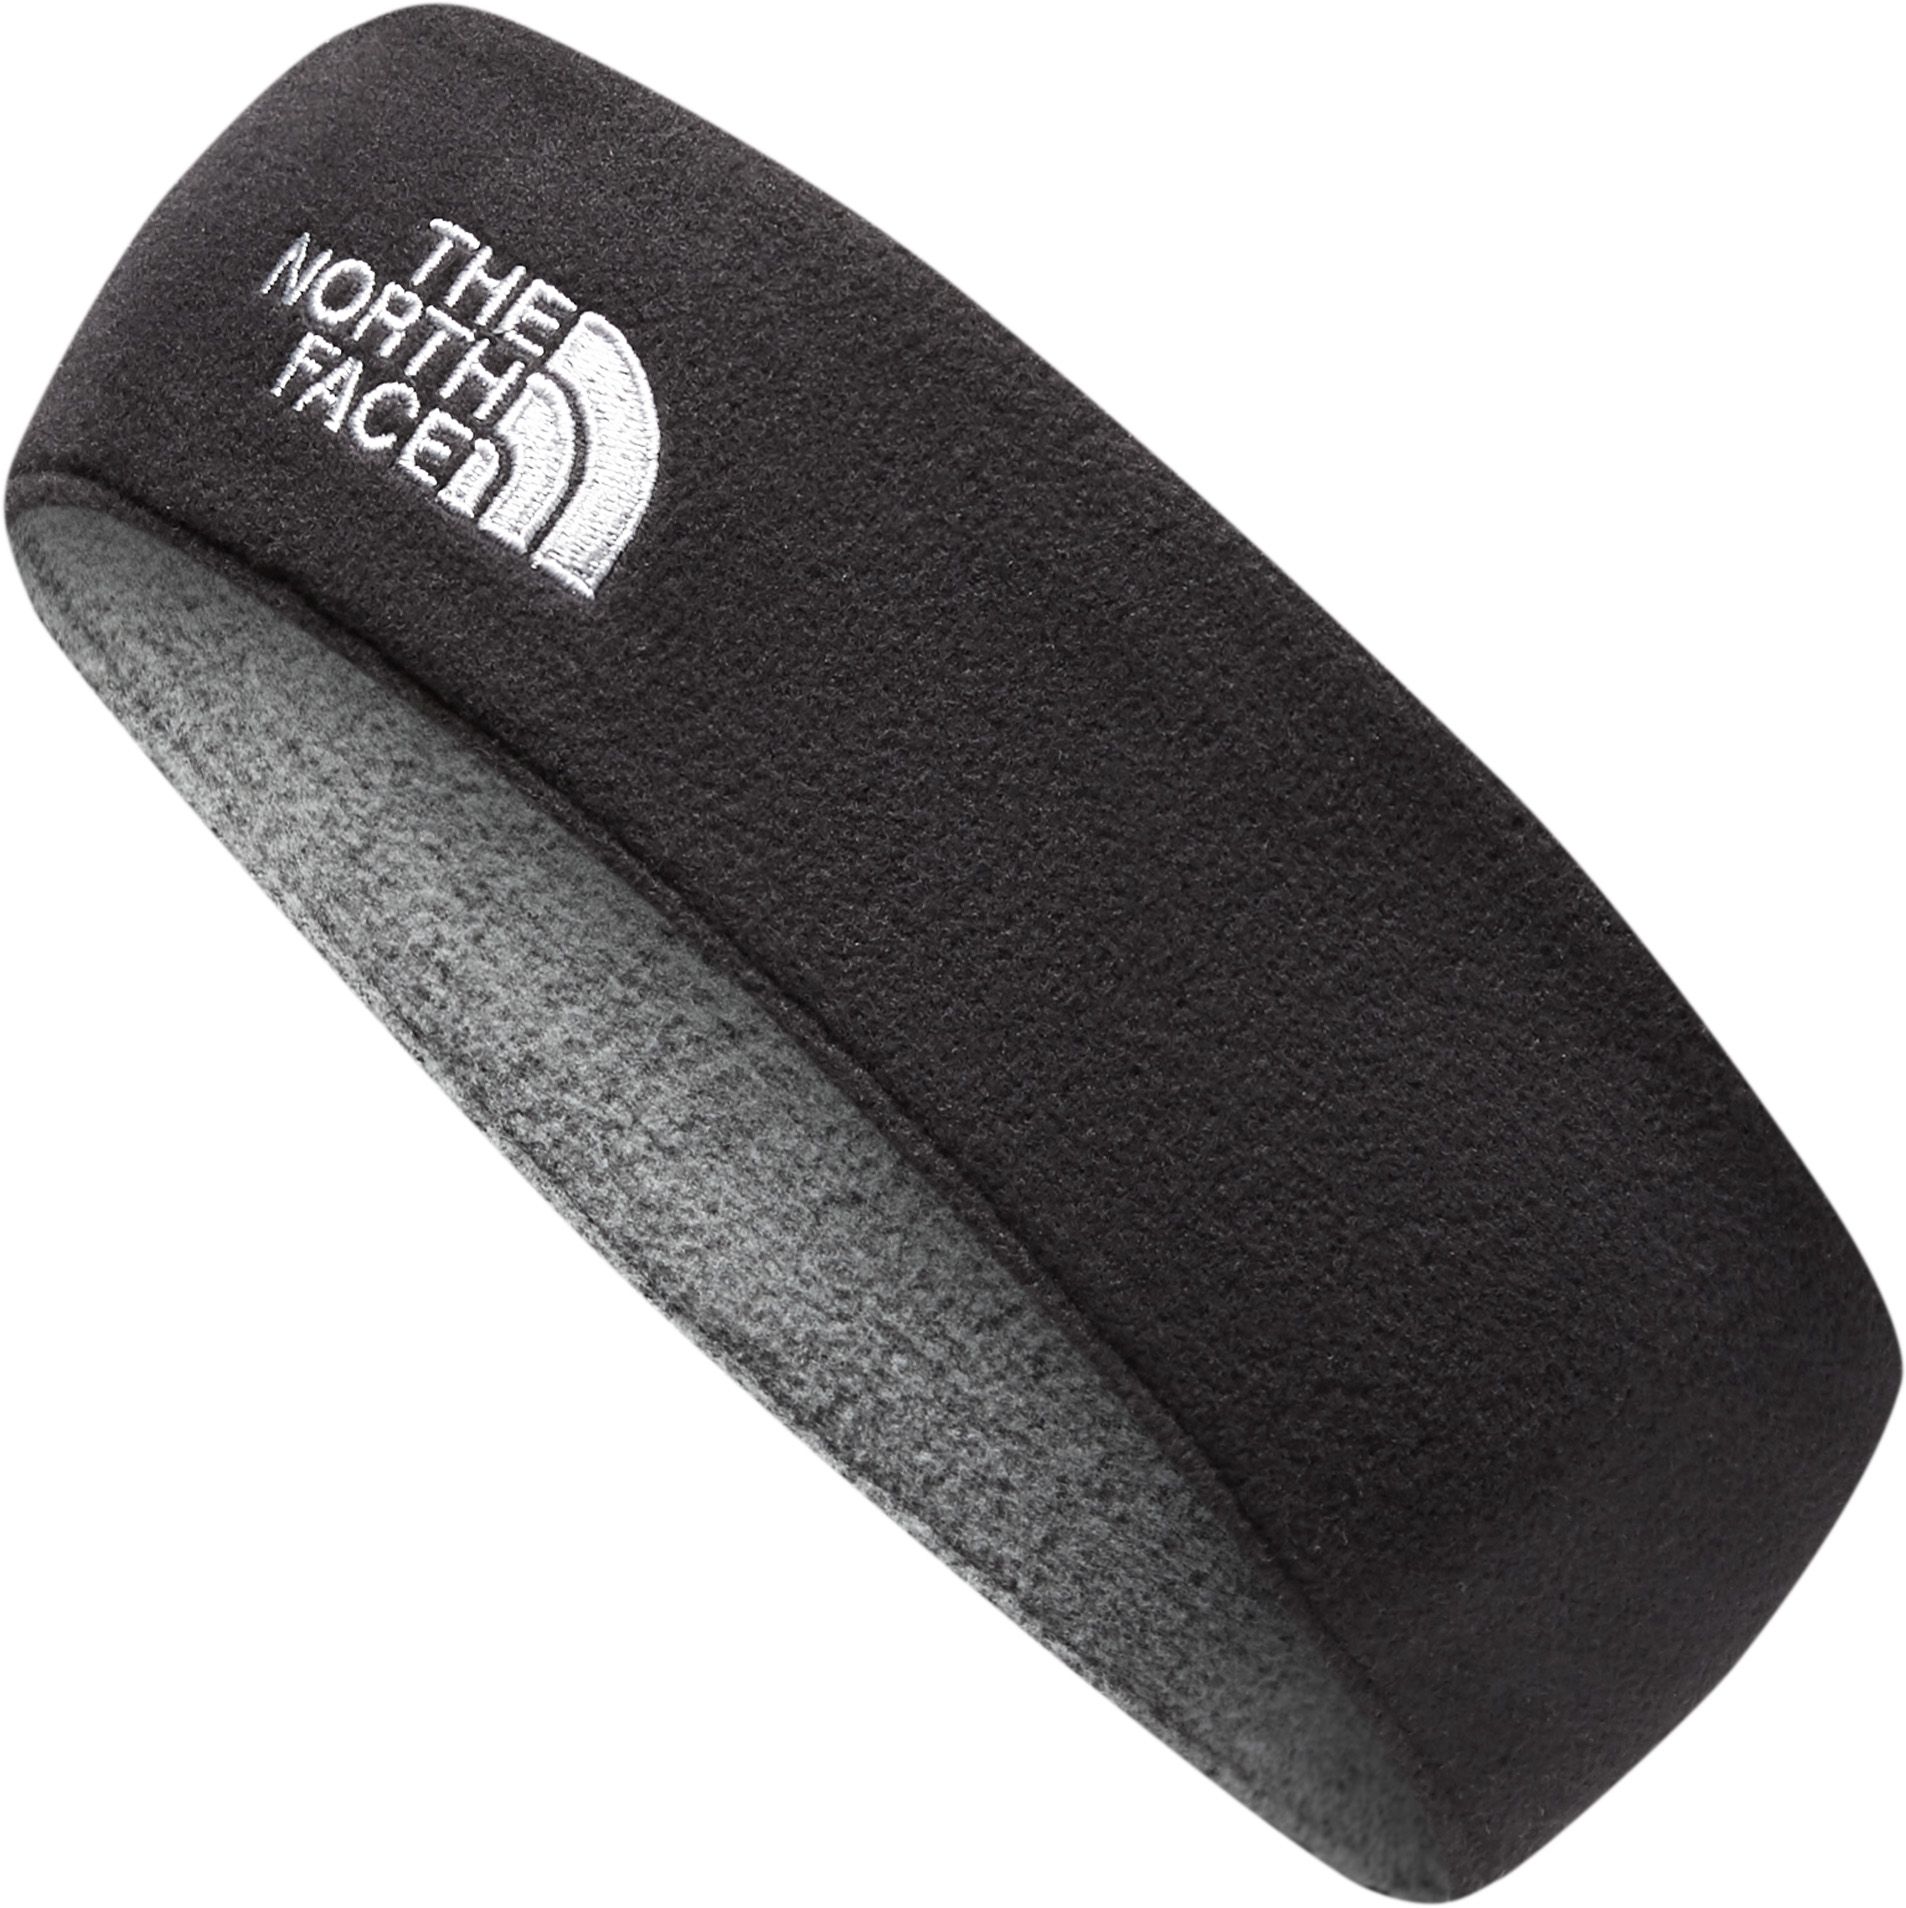 north face osito earband